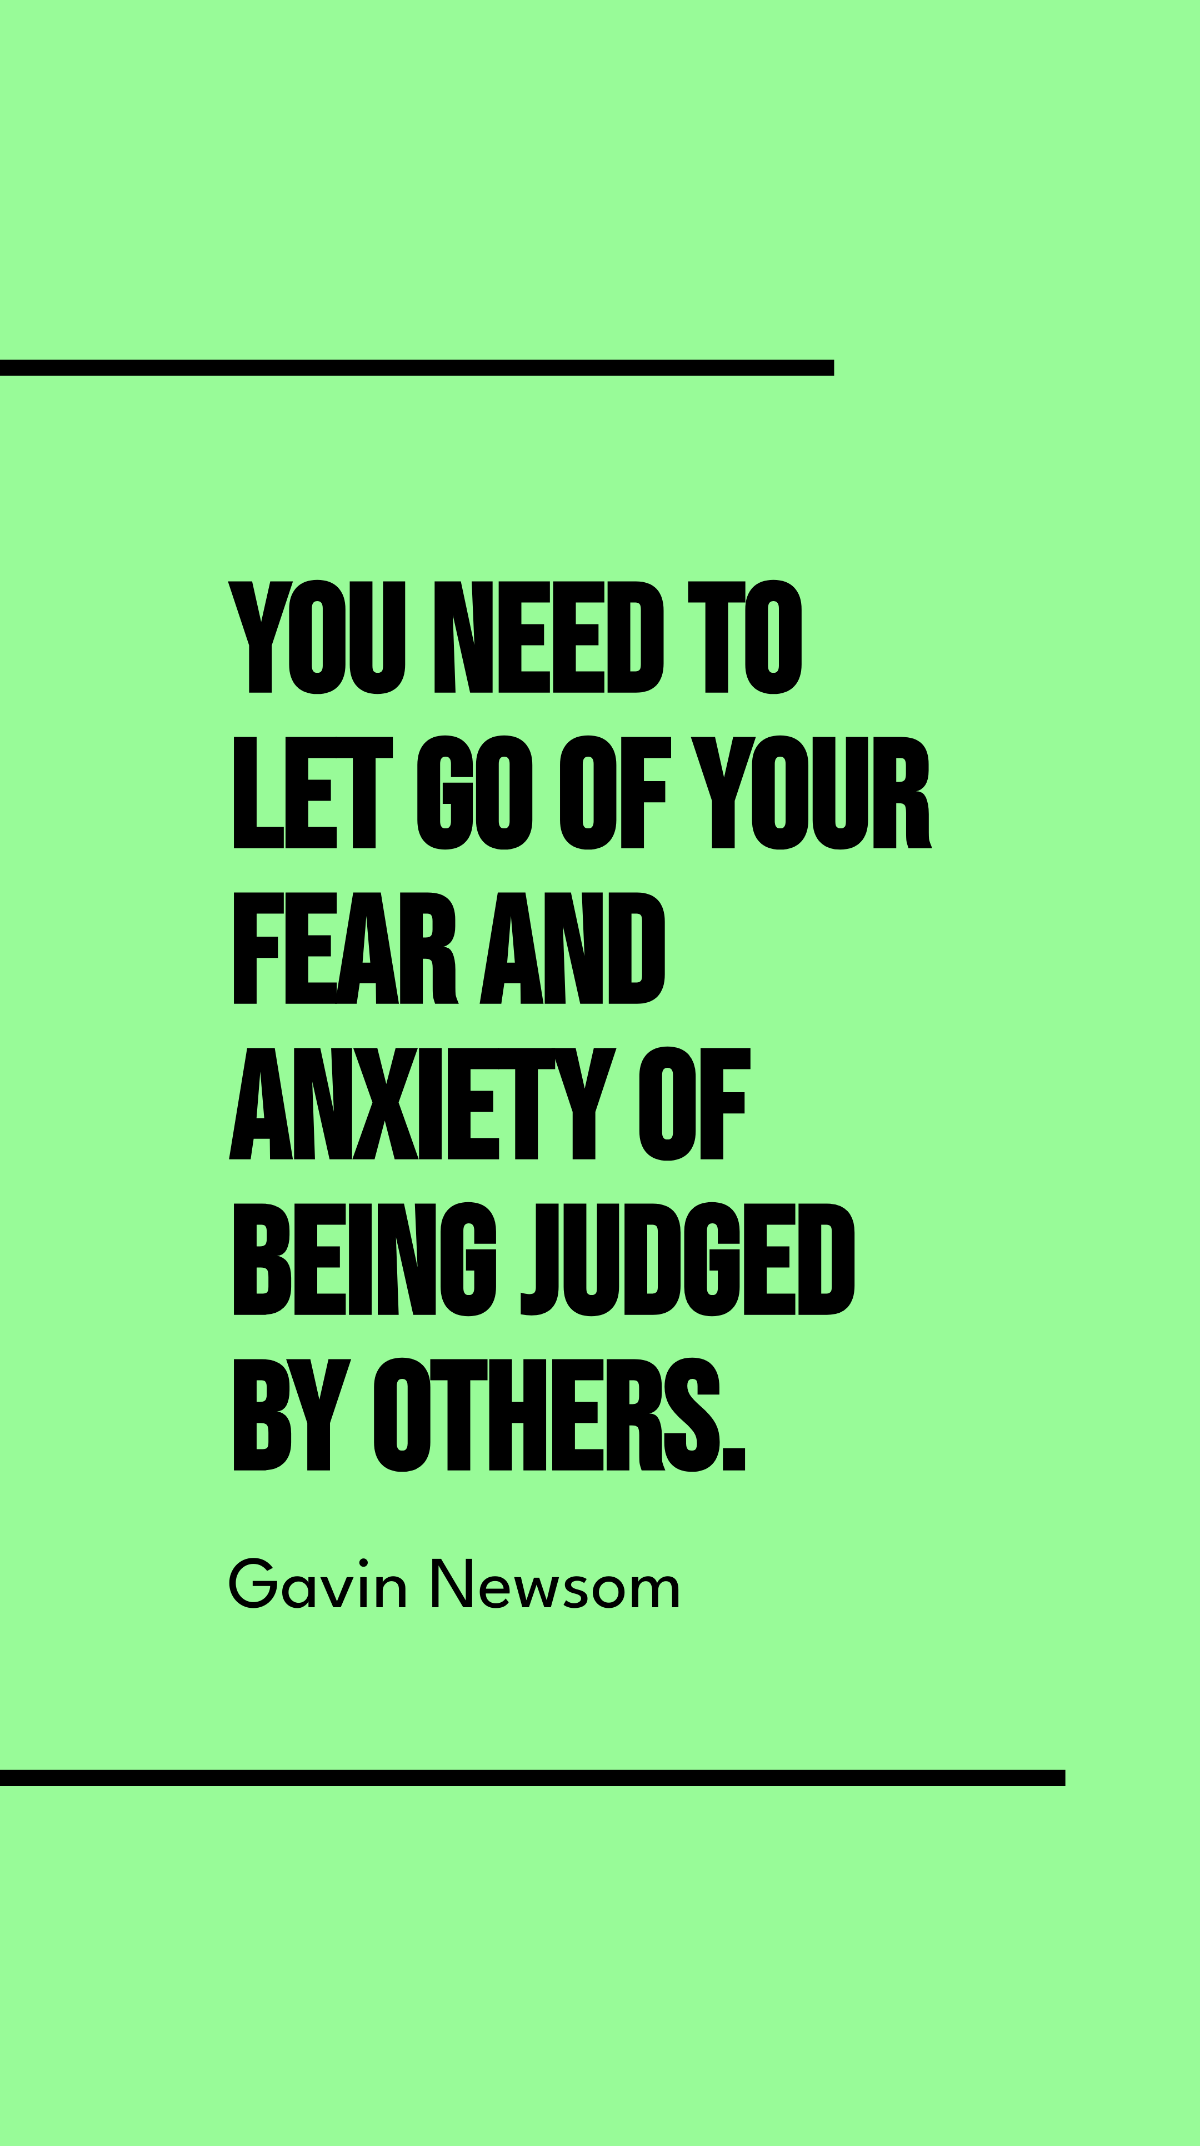 Gavin Newsom - You need to let go of your fear and anxiety of being judged by others. Template